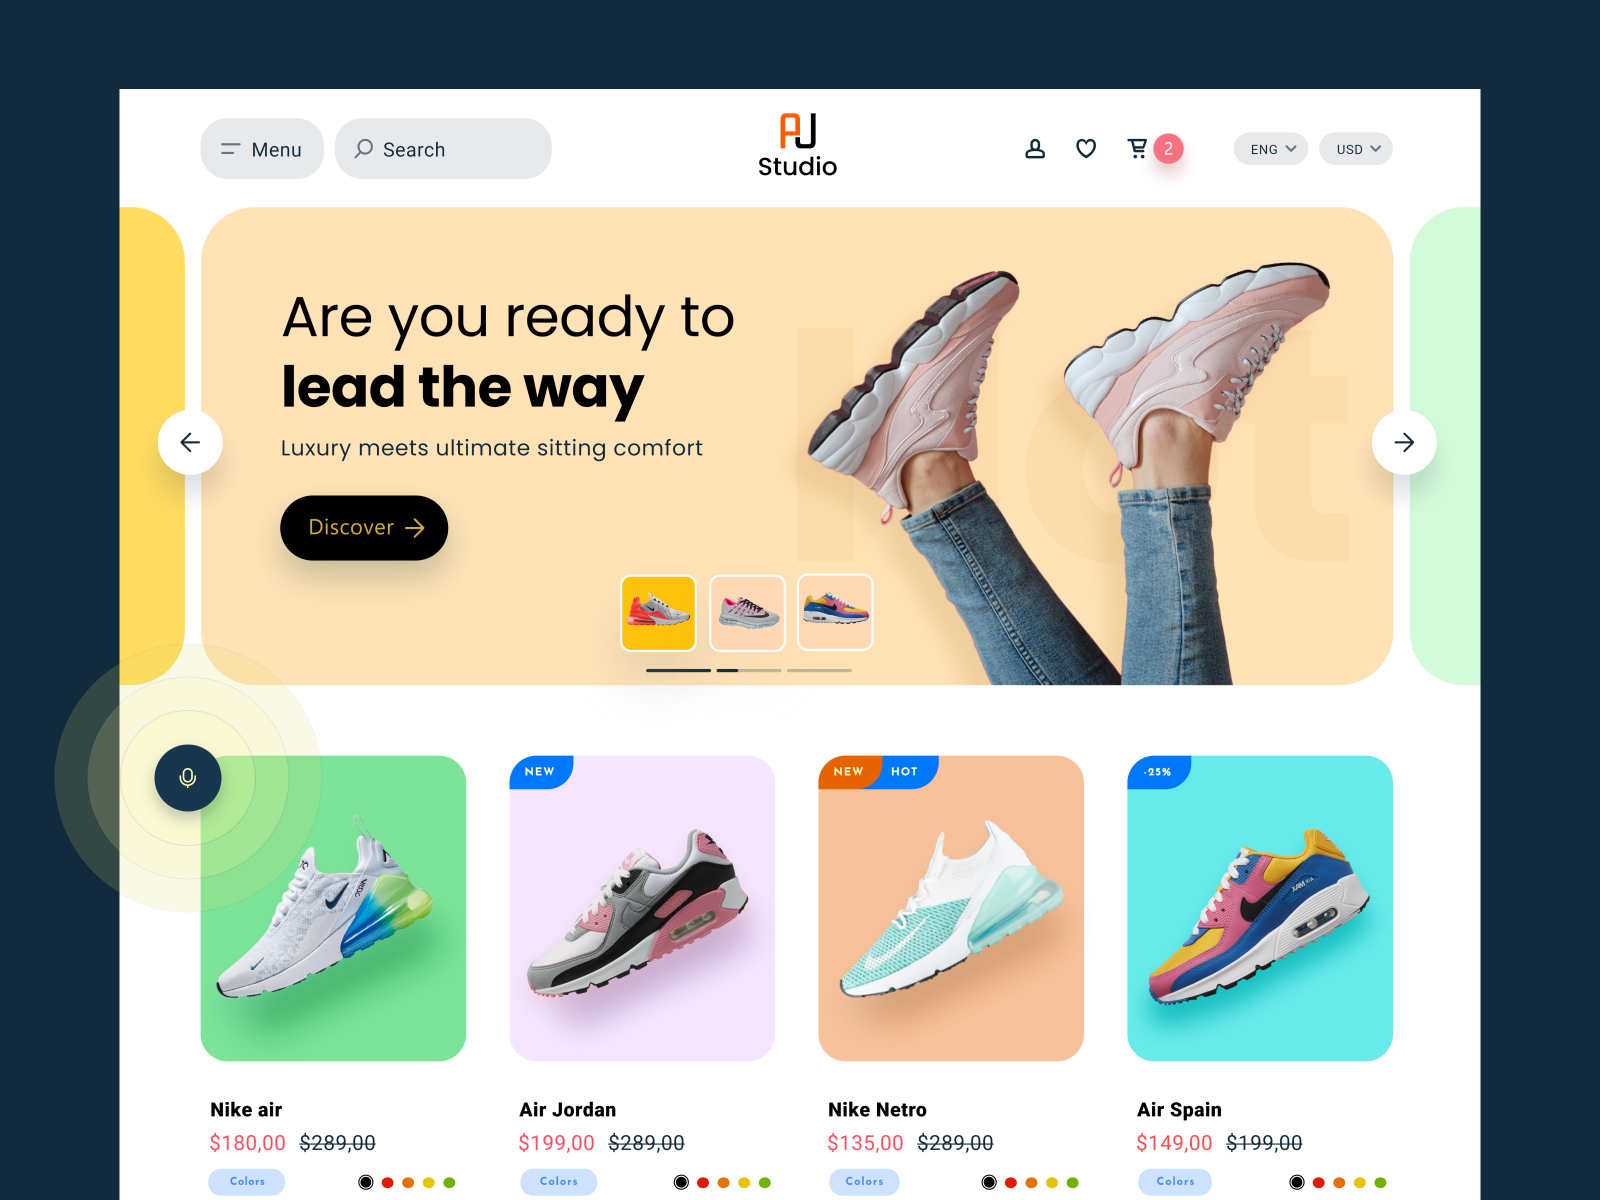 Online Shoe Store Concept by Hasnur Alam Ujjol on Dribbble